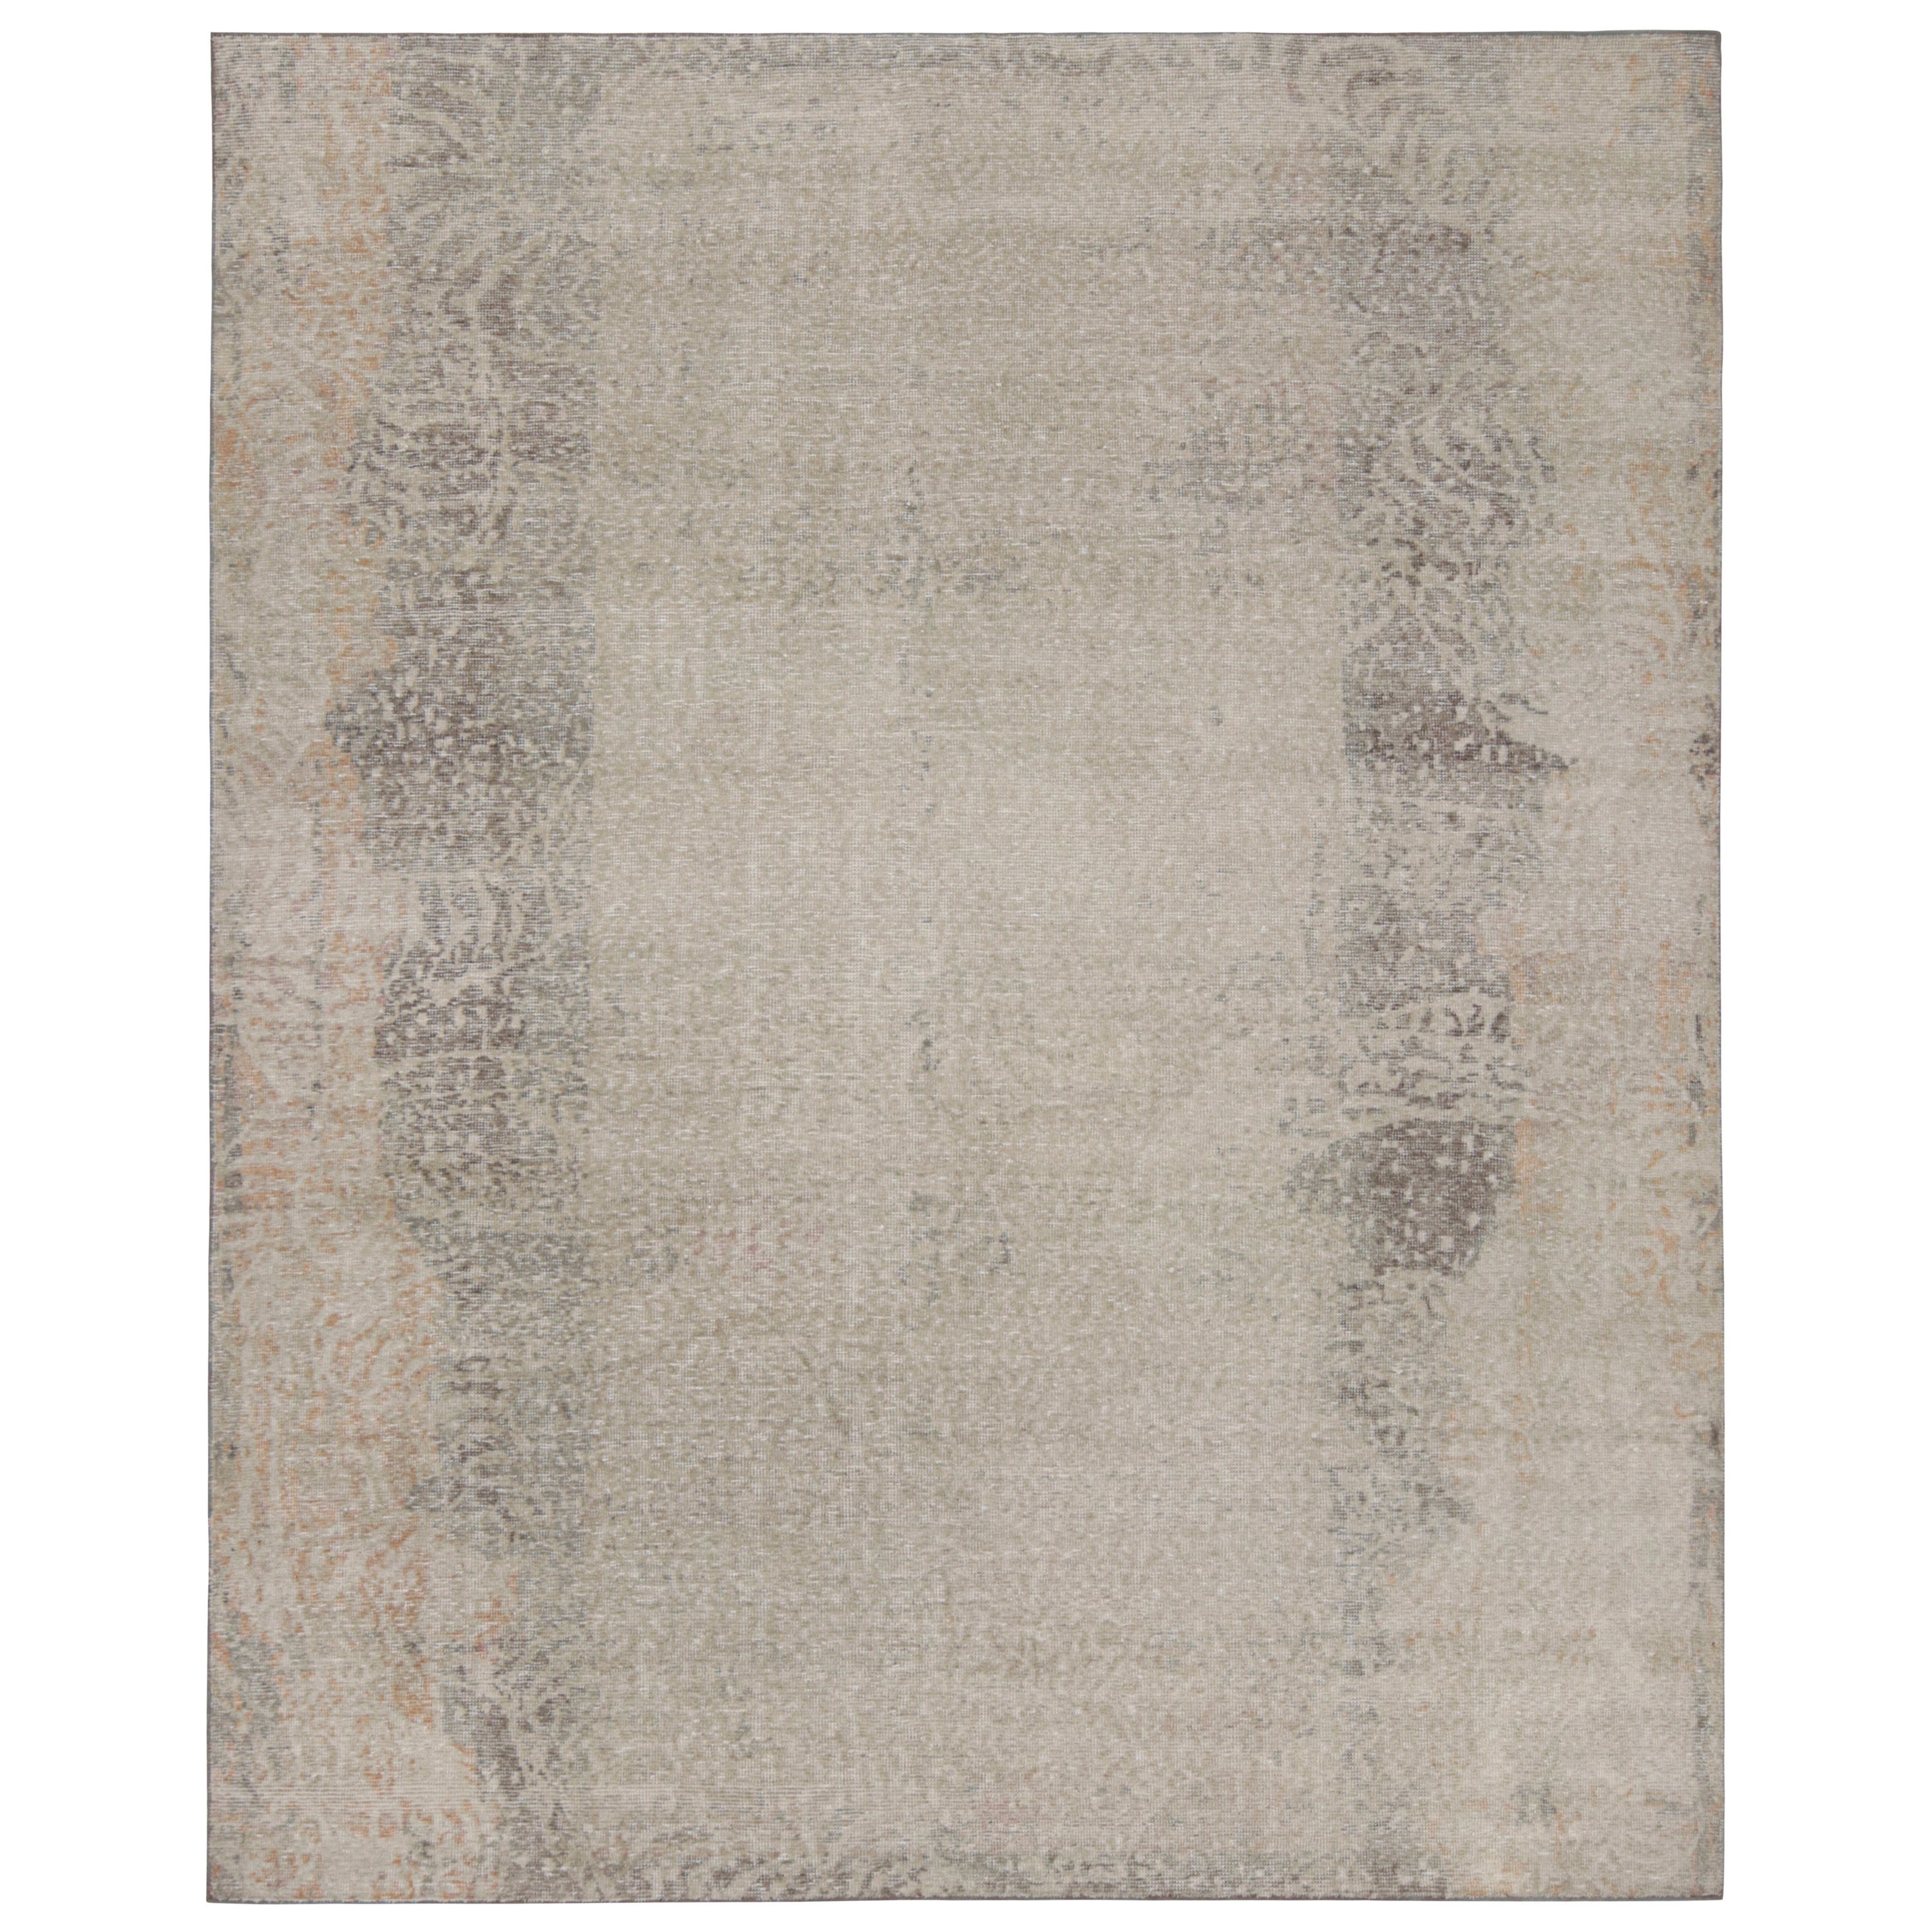 Rug & Kilim's Contemporary Abstract Rug in Taupe und Rust